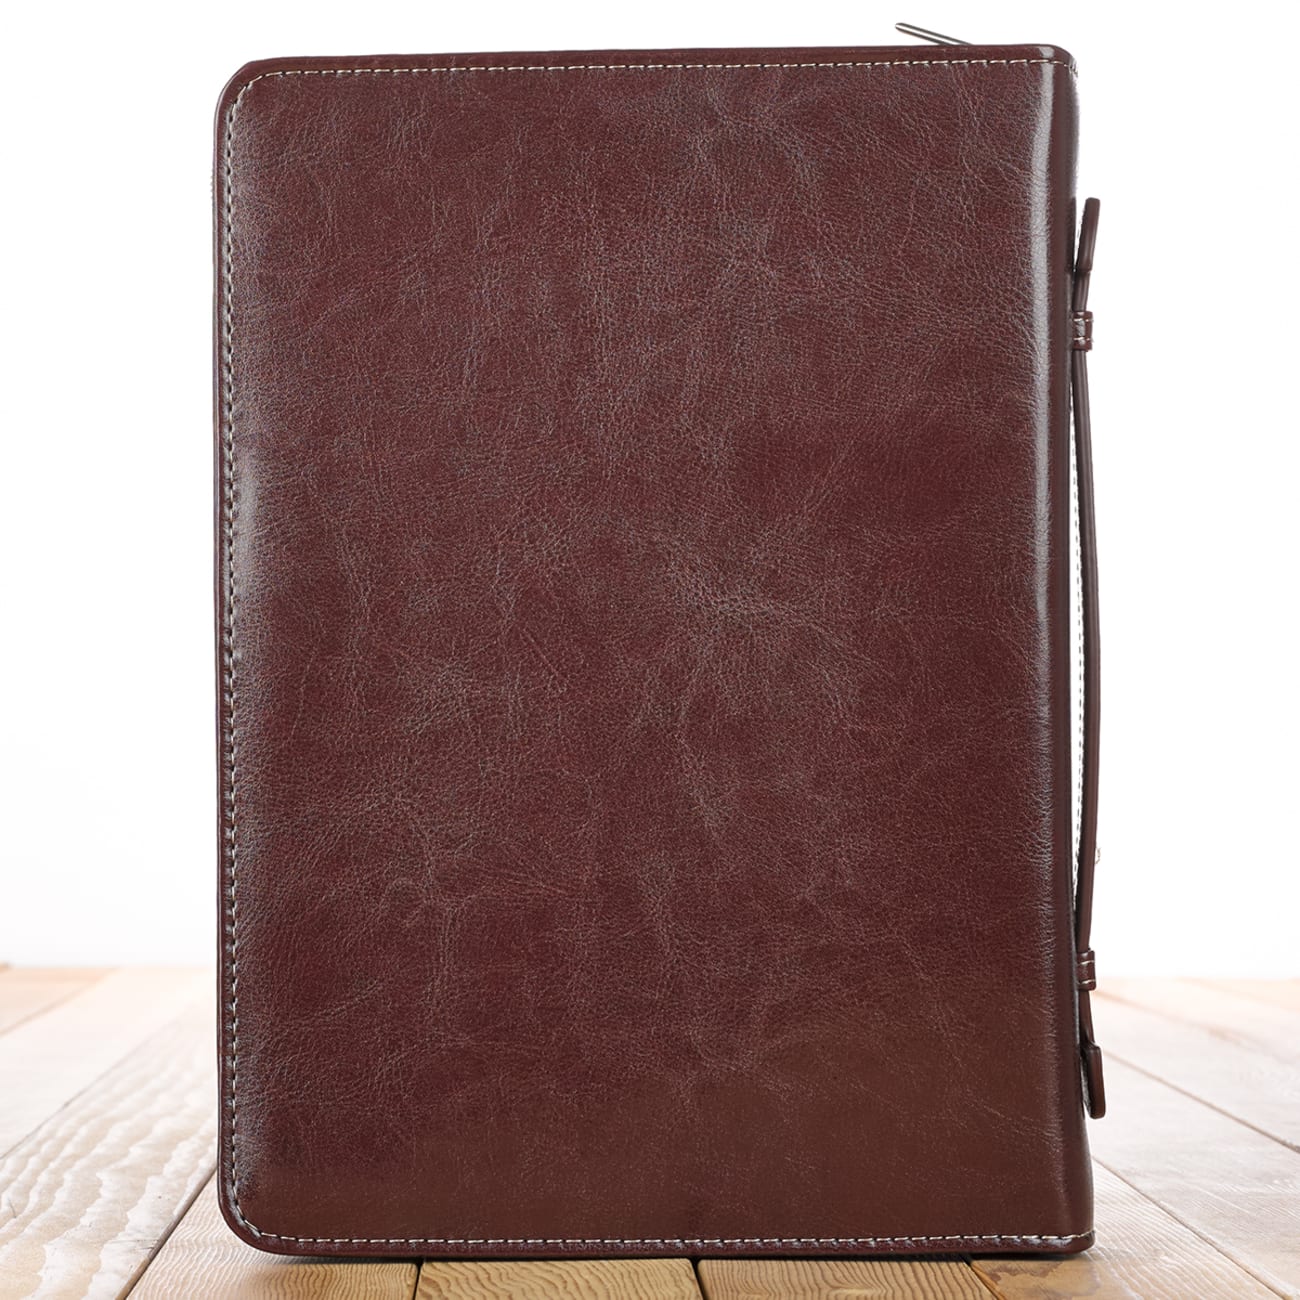 Bible Cover Extra Large: For I Know the Plans....Burgundy/Sand (Jer 29:11) Bible Cover